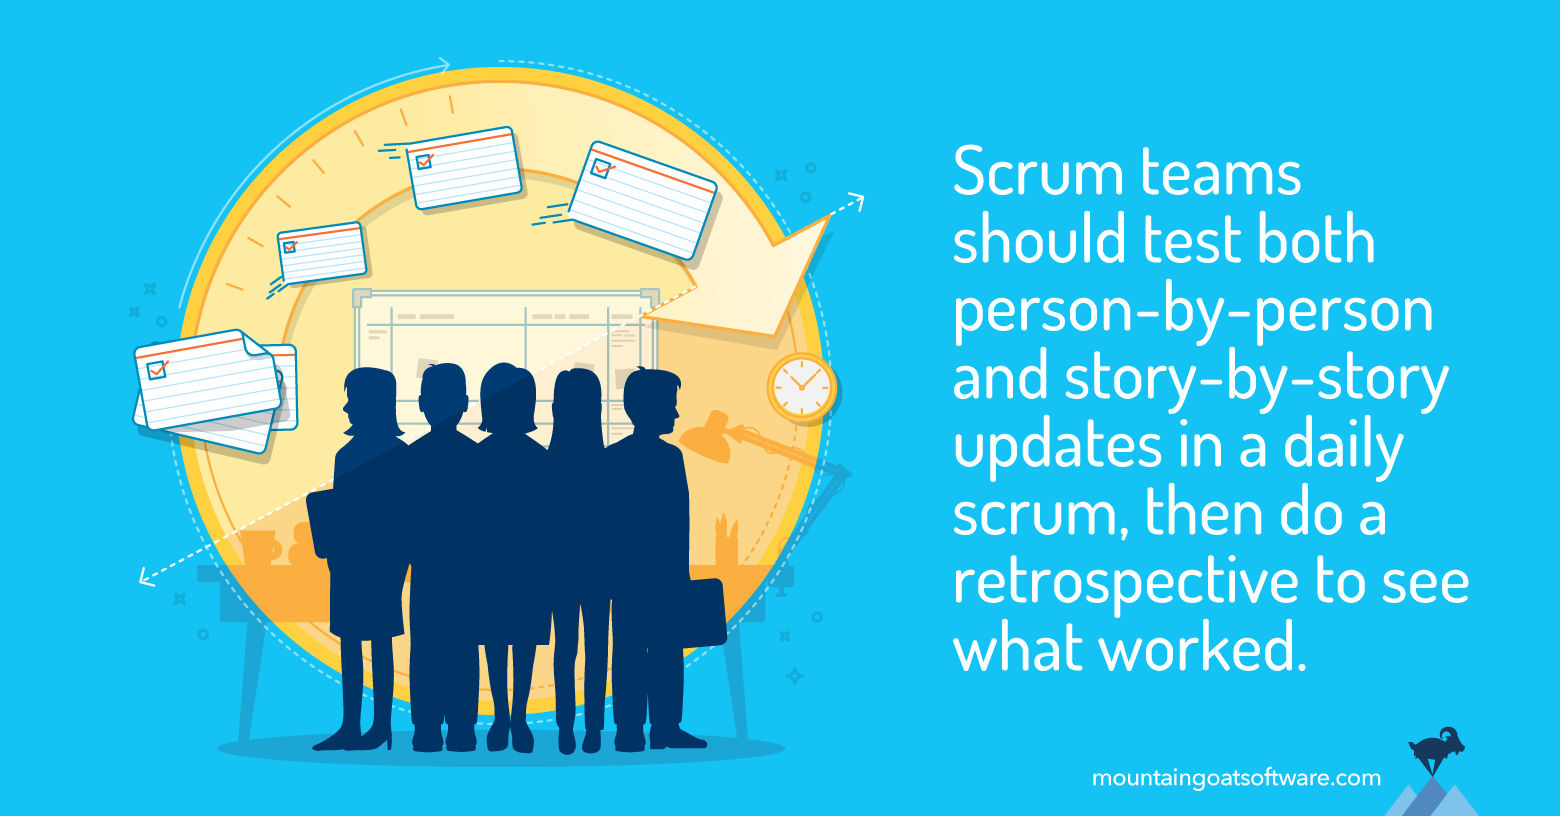 Should the Daily Scrum Be Person-by-Person or Story-by-Story?